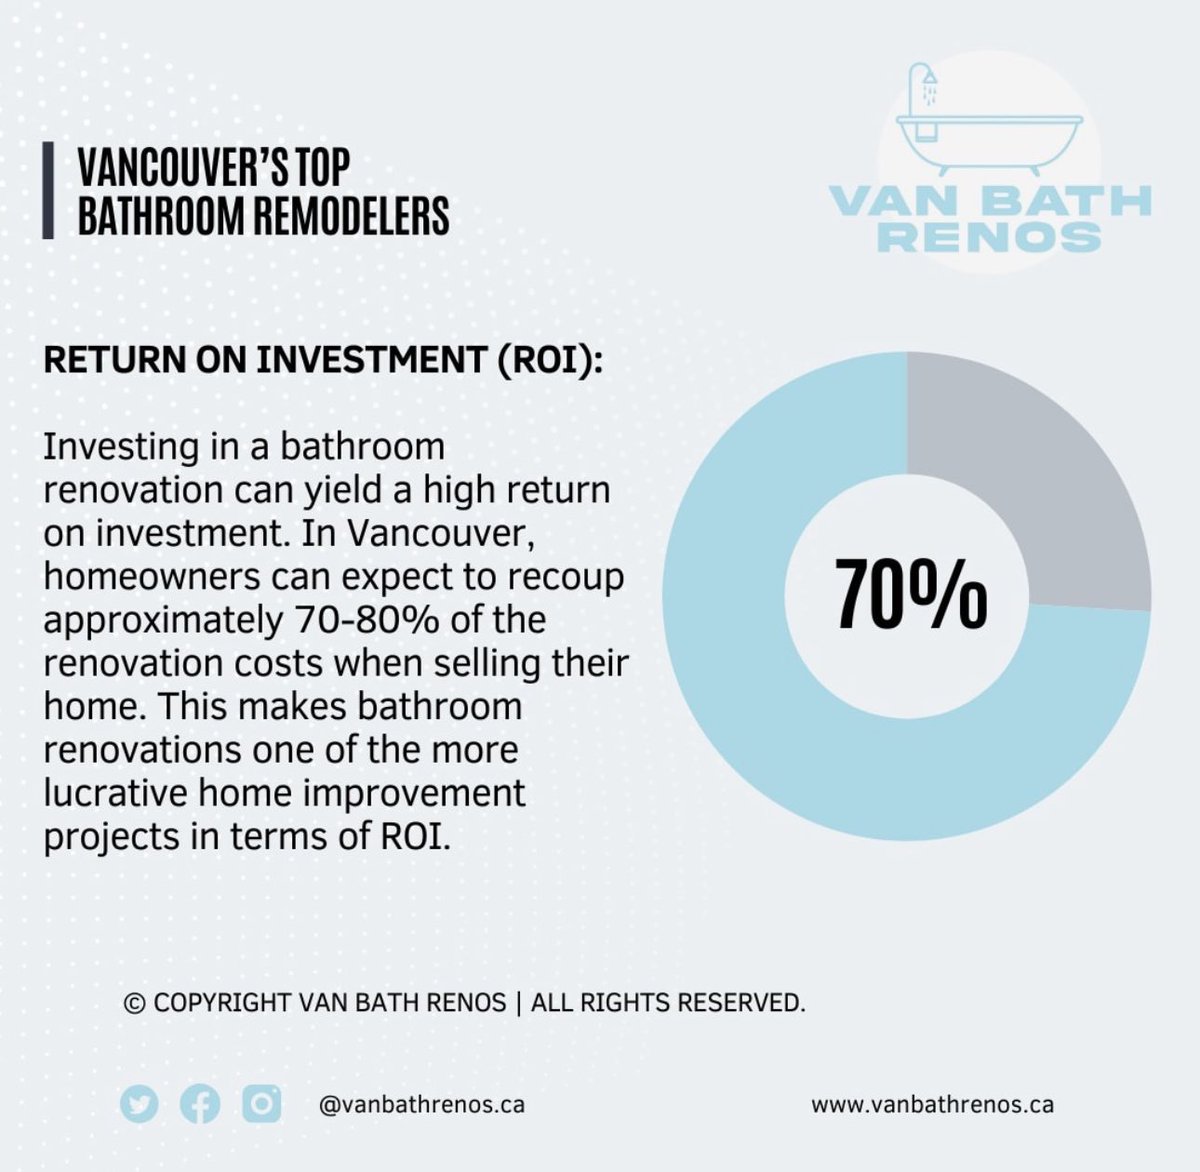 Maximize your home's value! 📈

A bathroom renovation in Vancouver can recoup up to 80% of its costs when you sell. A smart investment for your future! 

#VanBathRenos #ROI #HomeValue #BathroomRemodel #VancouverRealEstate #RenovationROI